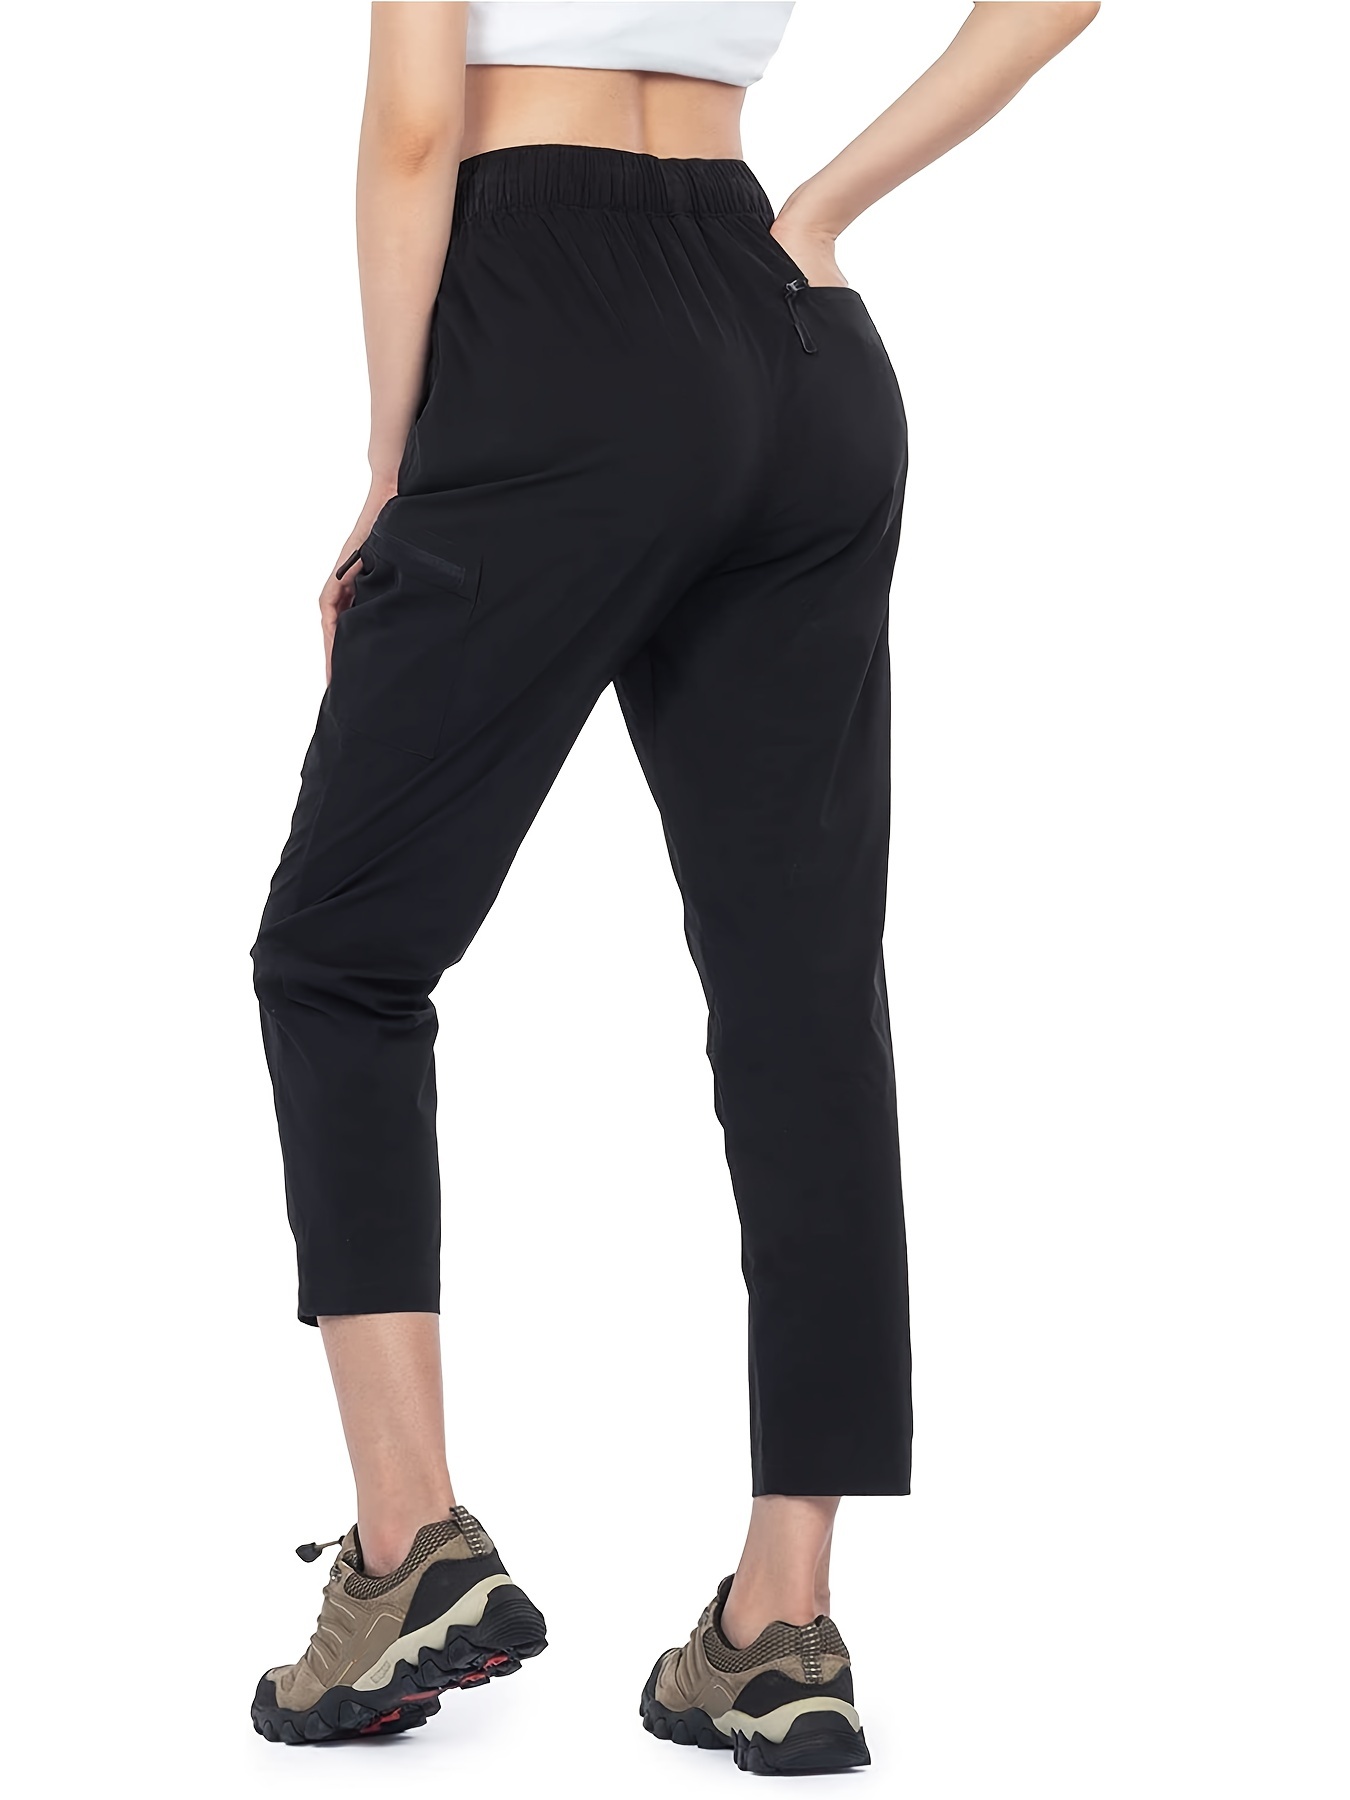  Women's Capri Yoga Pants Quick Dry High Waisted Hiking Lightweight  Pants Drawstring Outdoor Pants for Women Black : Clothing, Shoes & Jewelry